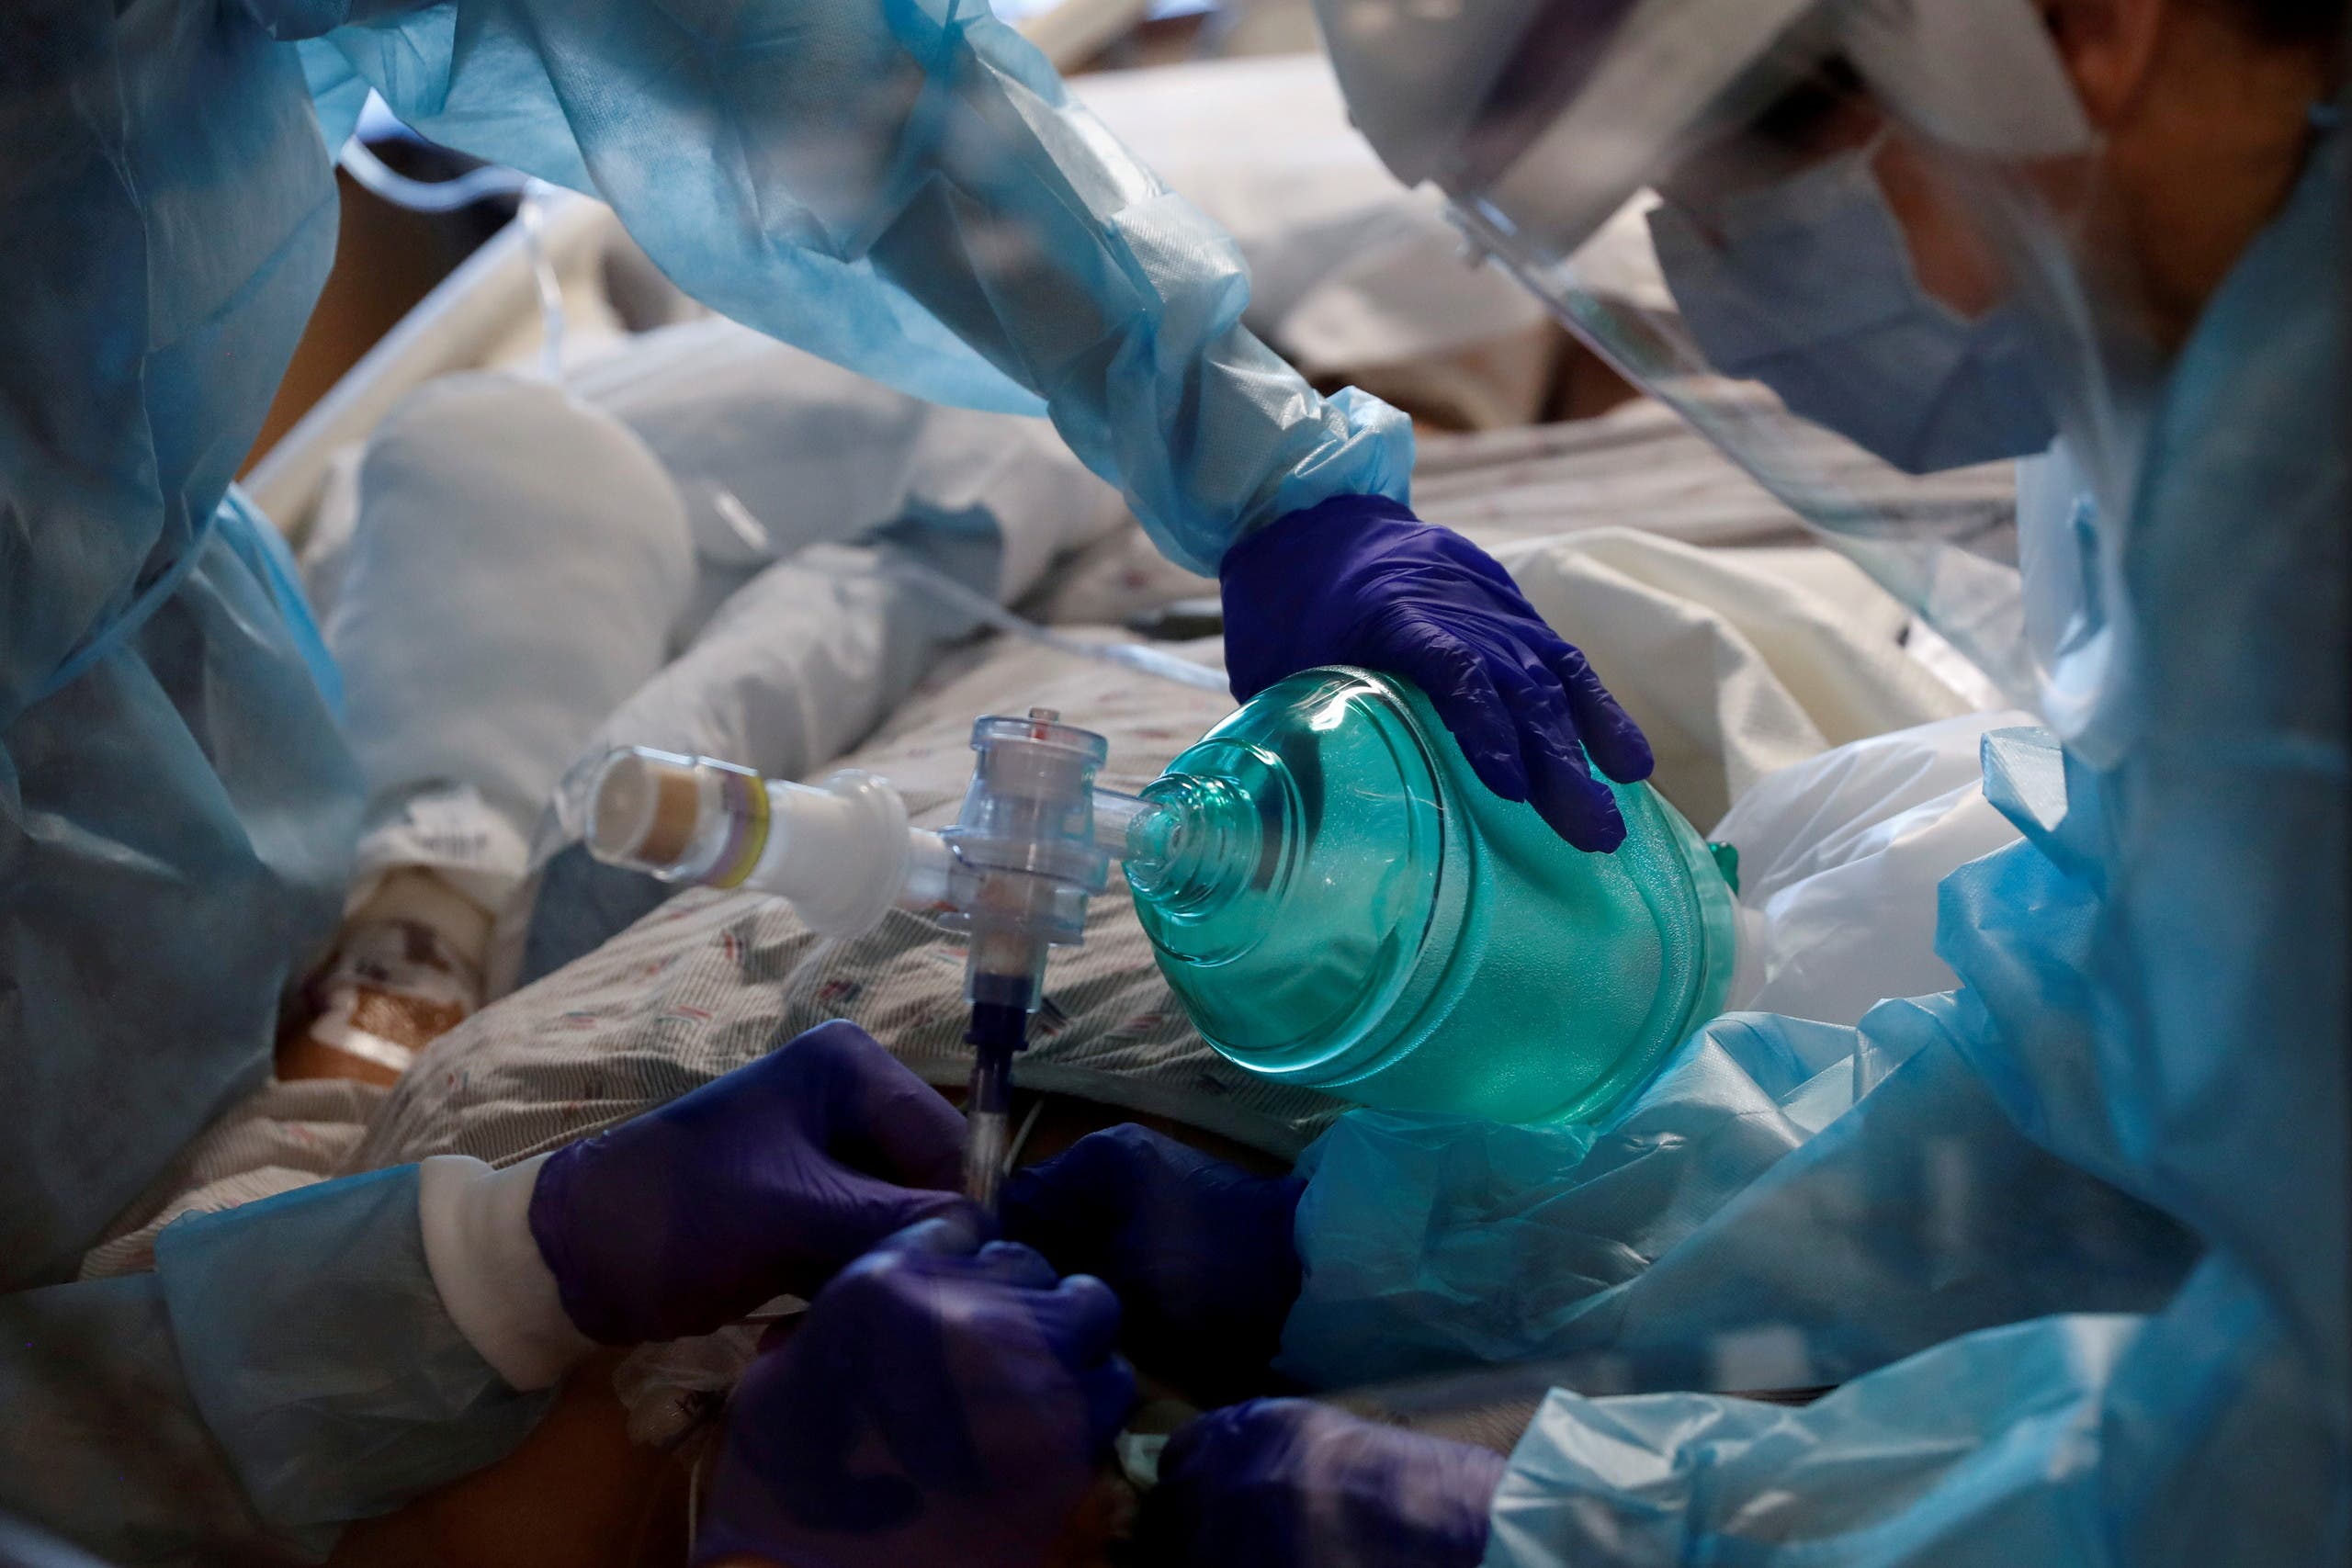 Critical care workers insert an endotracheal tube into a coronavirus disease (COVID-19) positive patient in the intensive care unit (ICU) at Sarasota Memorial Hospital in Sarasota, Florida, February 11, 2021. (Reuters)